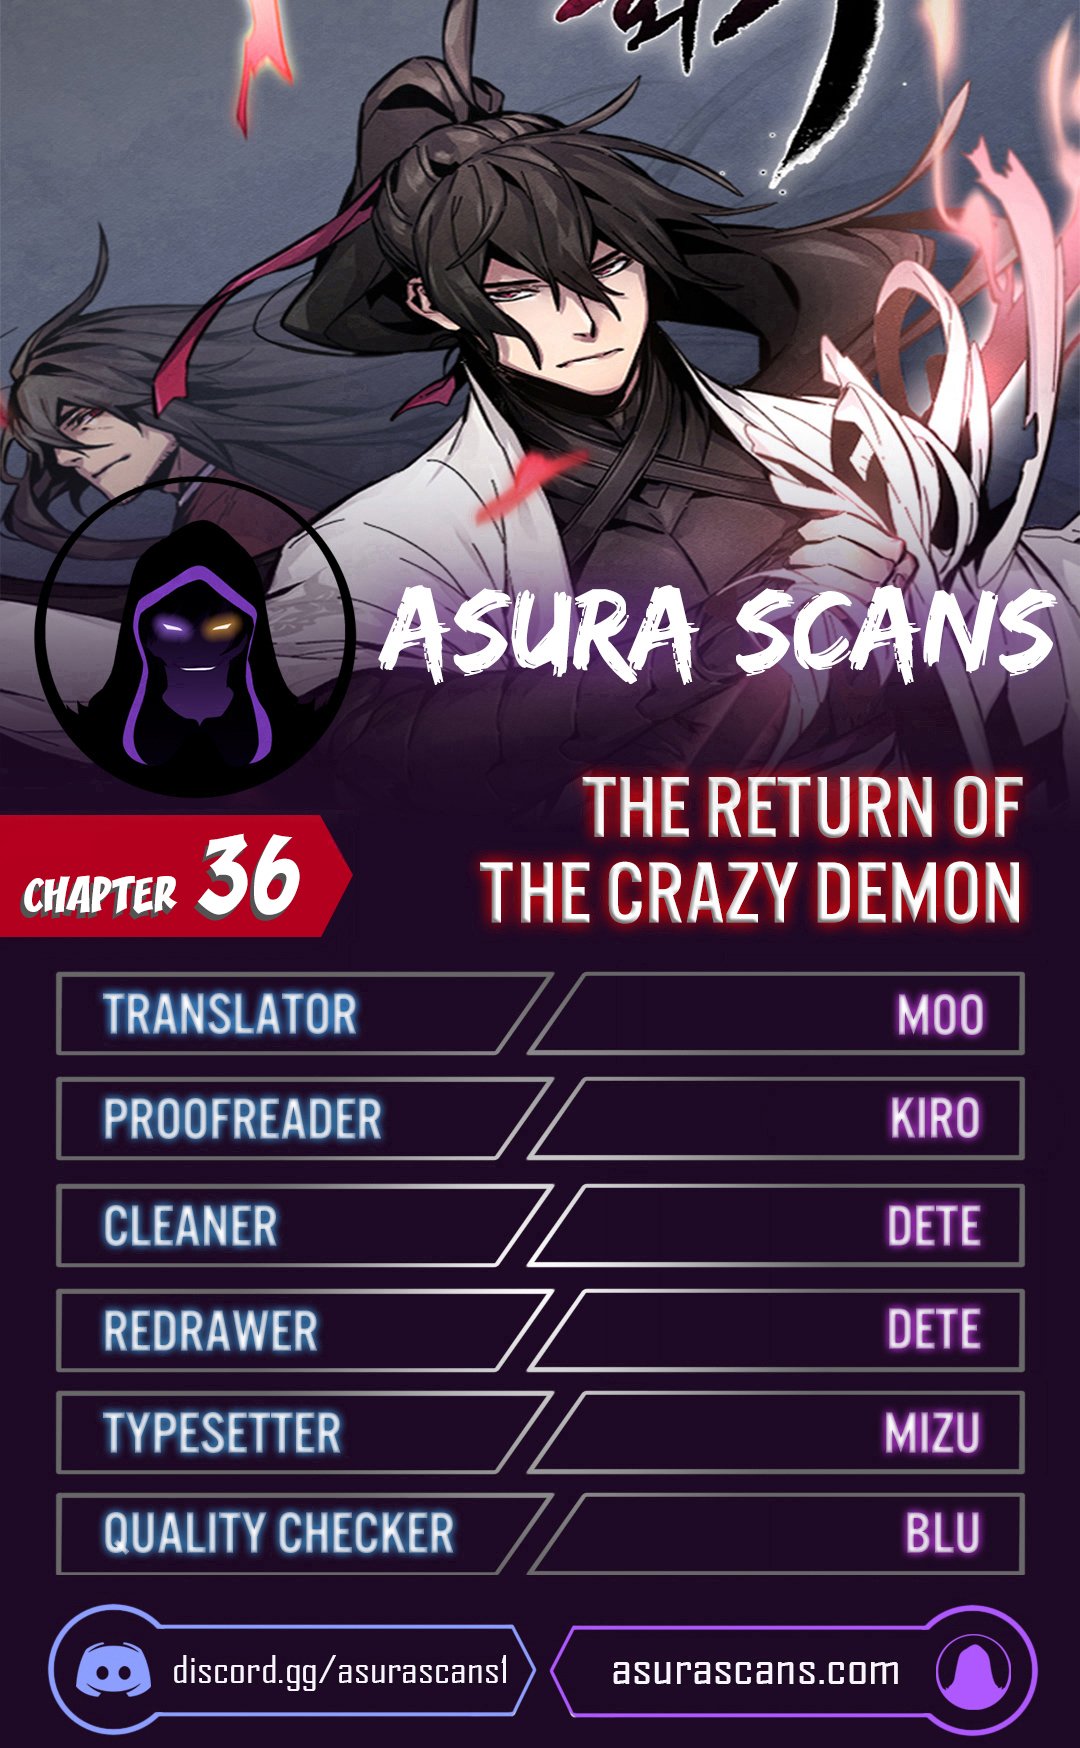 The Return of the Crazy Demon - Chapter 18577 - Image 1